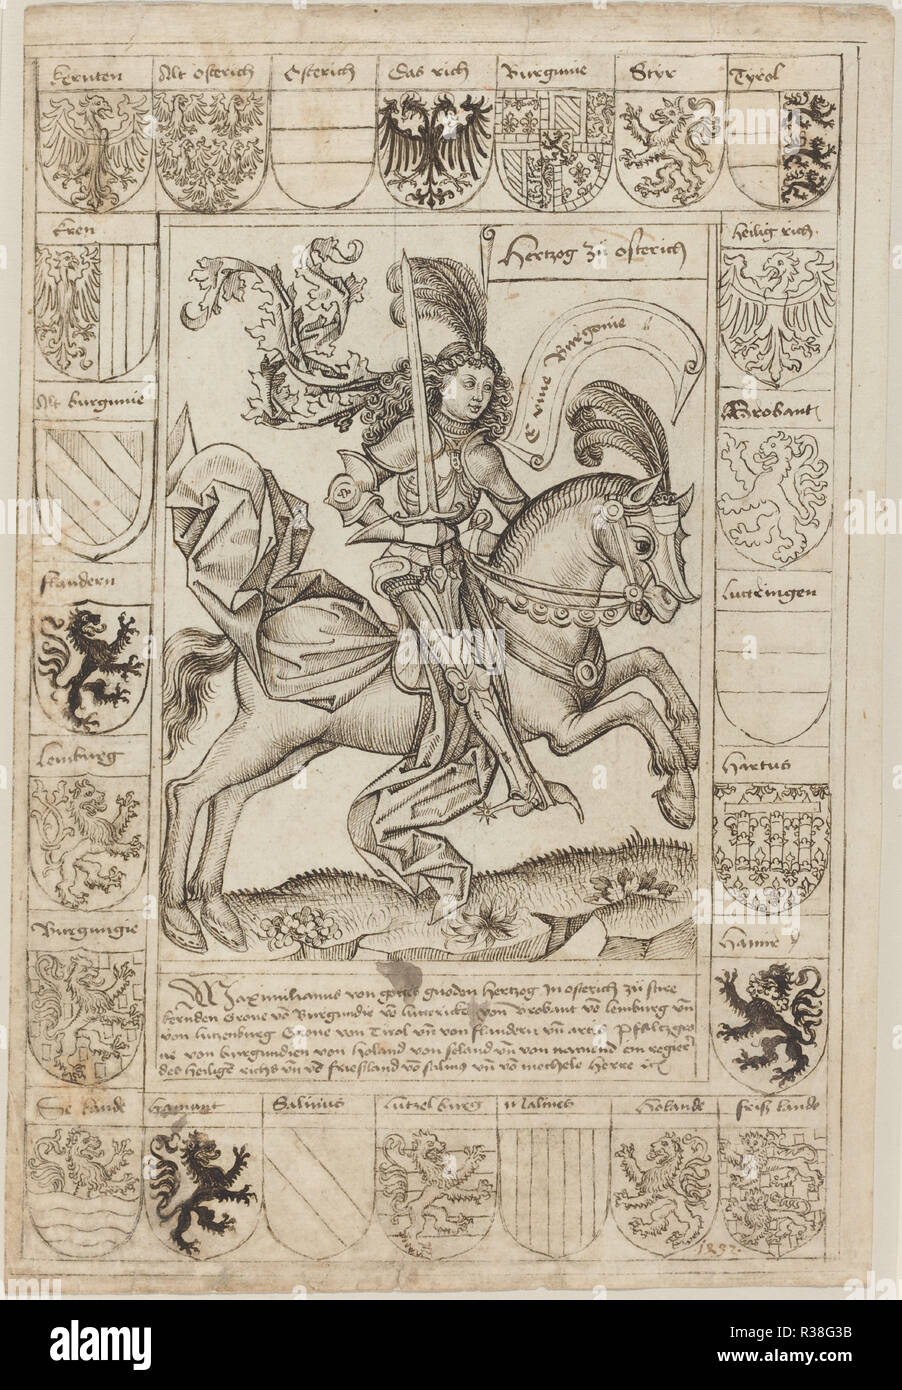 Maximilian, Duke of Austria, on Horseback. Dated: 1492. Dimensions: overall: 38.7 x 26.1 cm (15 1/4 x 10 1/4 in.). Medium: pen and black ink over traces of black chalk on laid paper ruled in leadpoint. Museum: National Gallery of Art, Washington DC. Author: Primary Master of the Strassburg Chronicle. Stock Photo